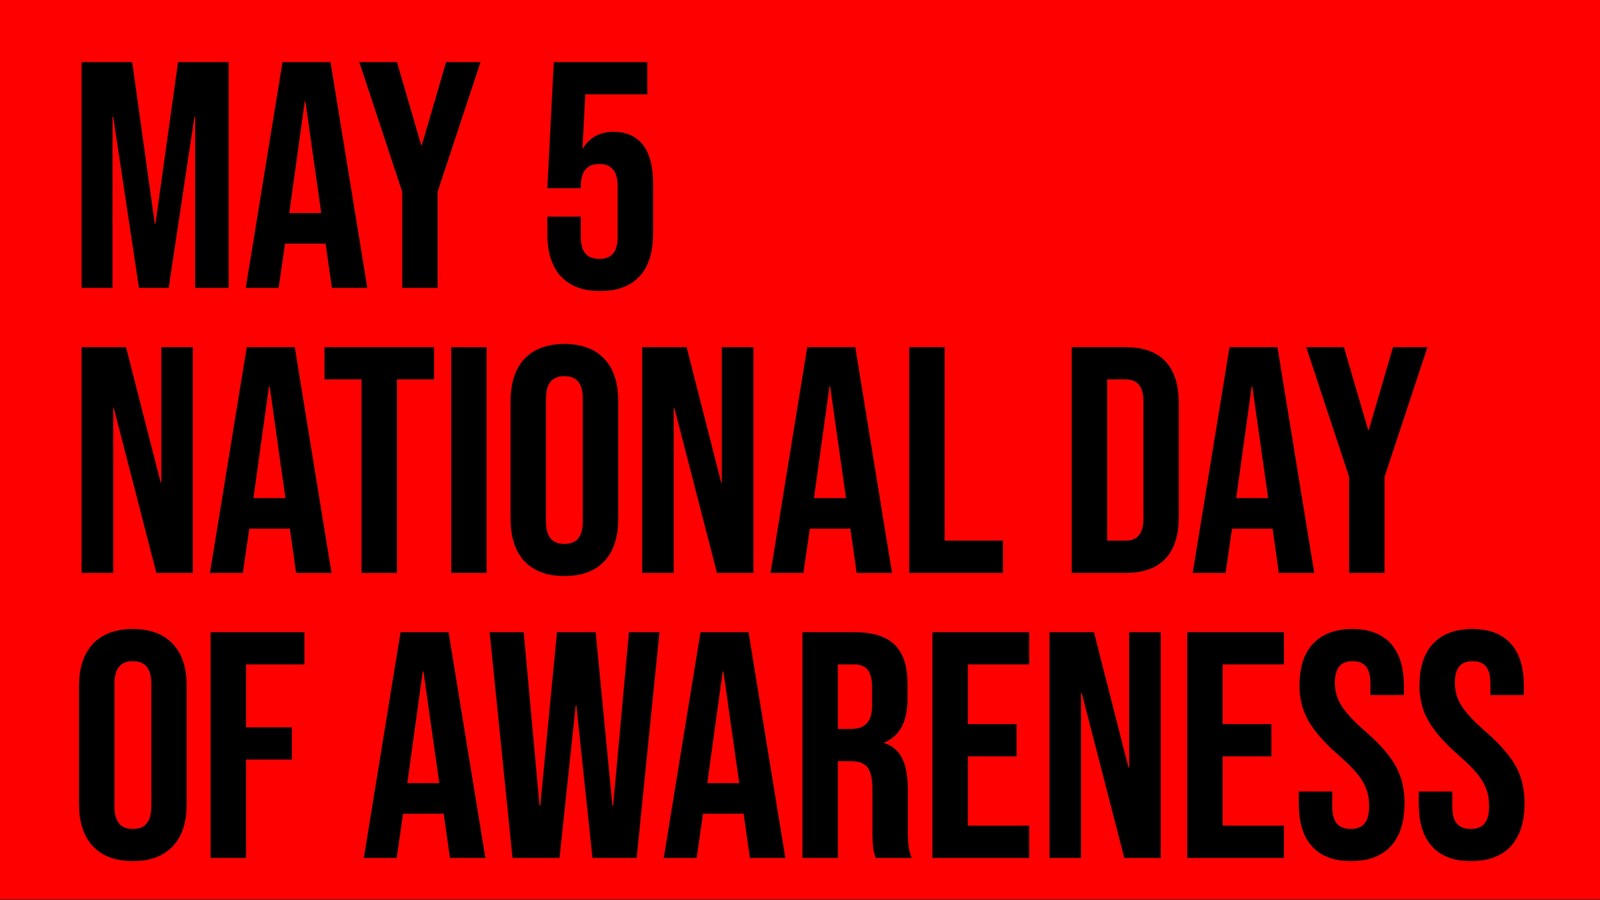 National Day of Awareness "Red Dress Day" May 5